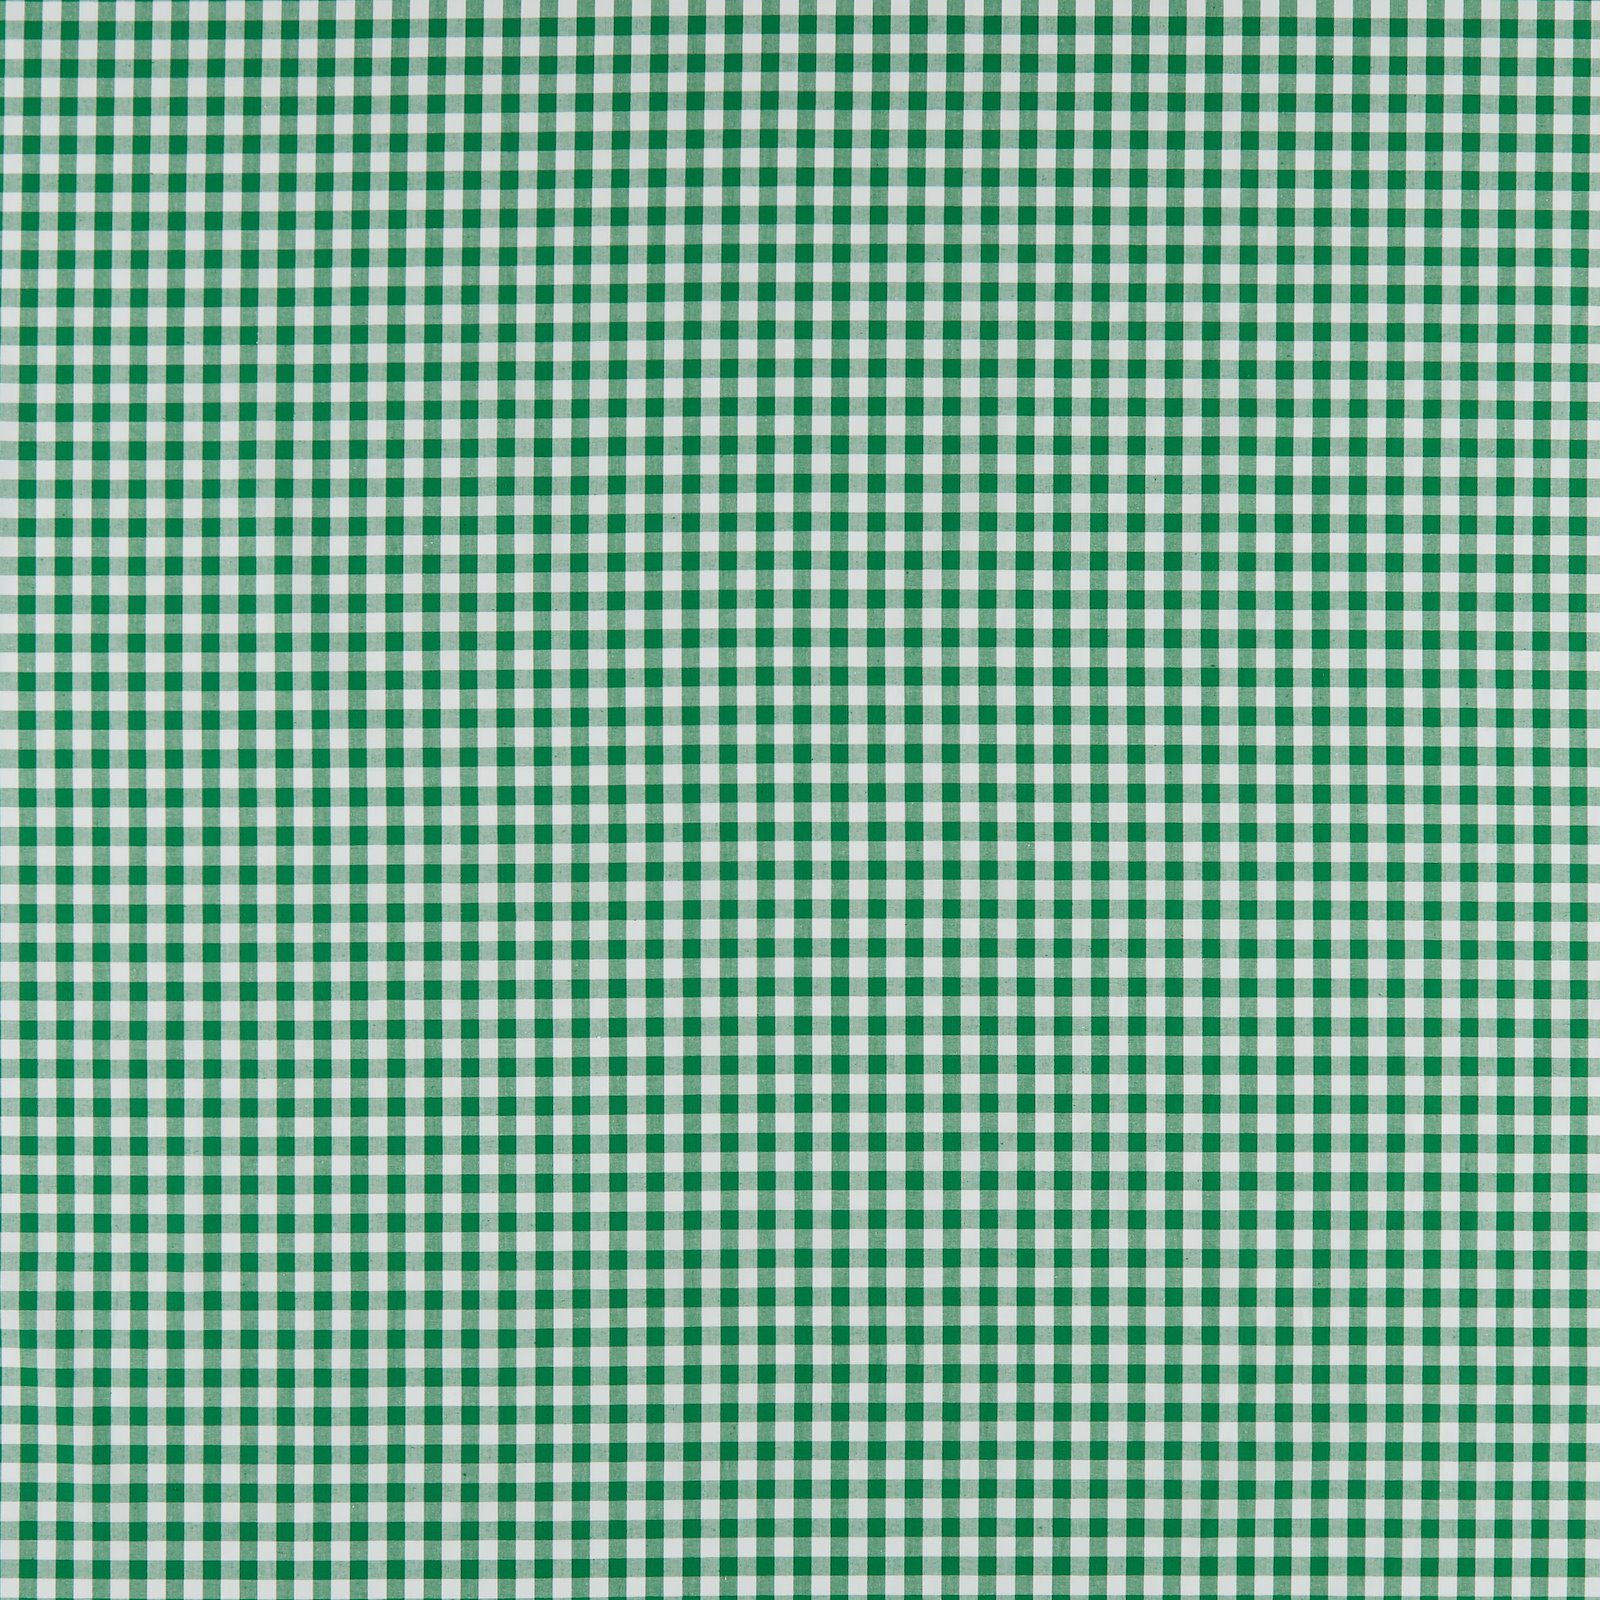 Cotton yarn dyed green/white check 780894_pack_sp